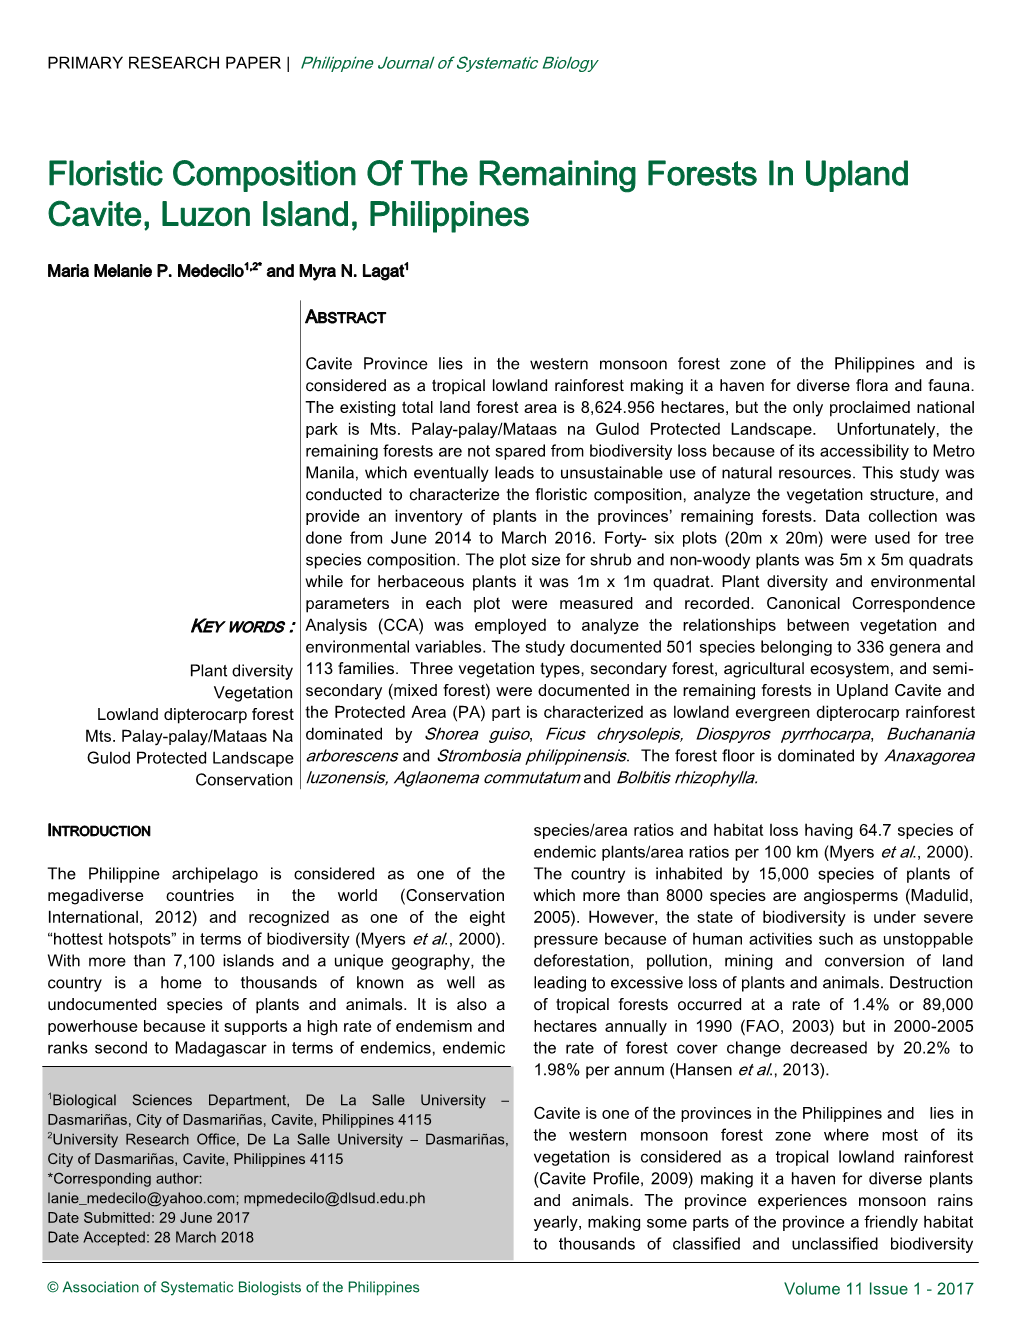 Floristic Composition of the Remaining Forests in Upland Cavite, Luzon Island, Philippines